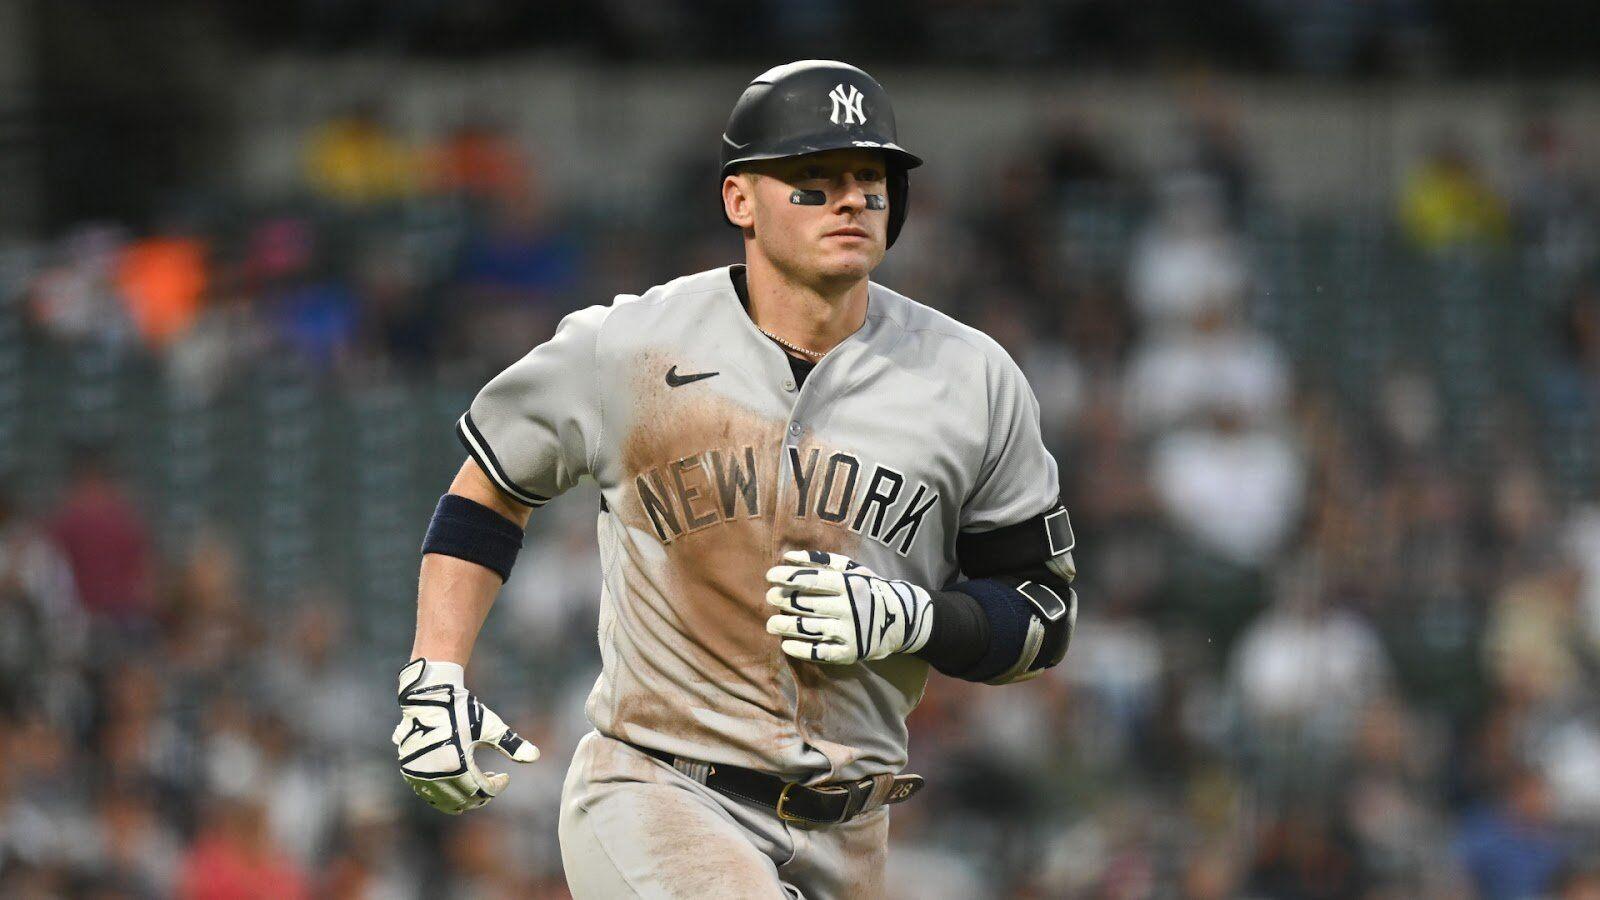 Josh Donaldson 'likely' headed to injured list, Yankees say